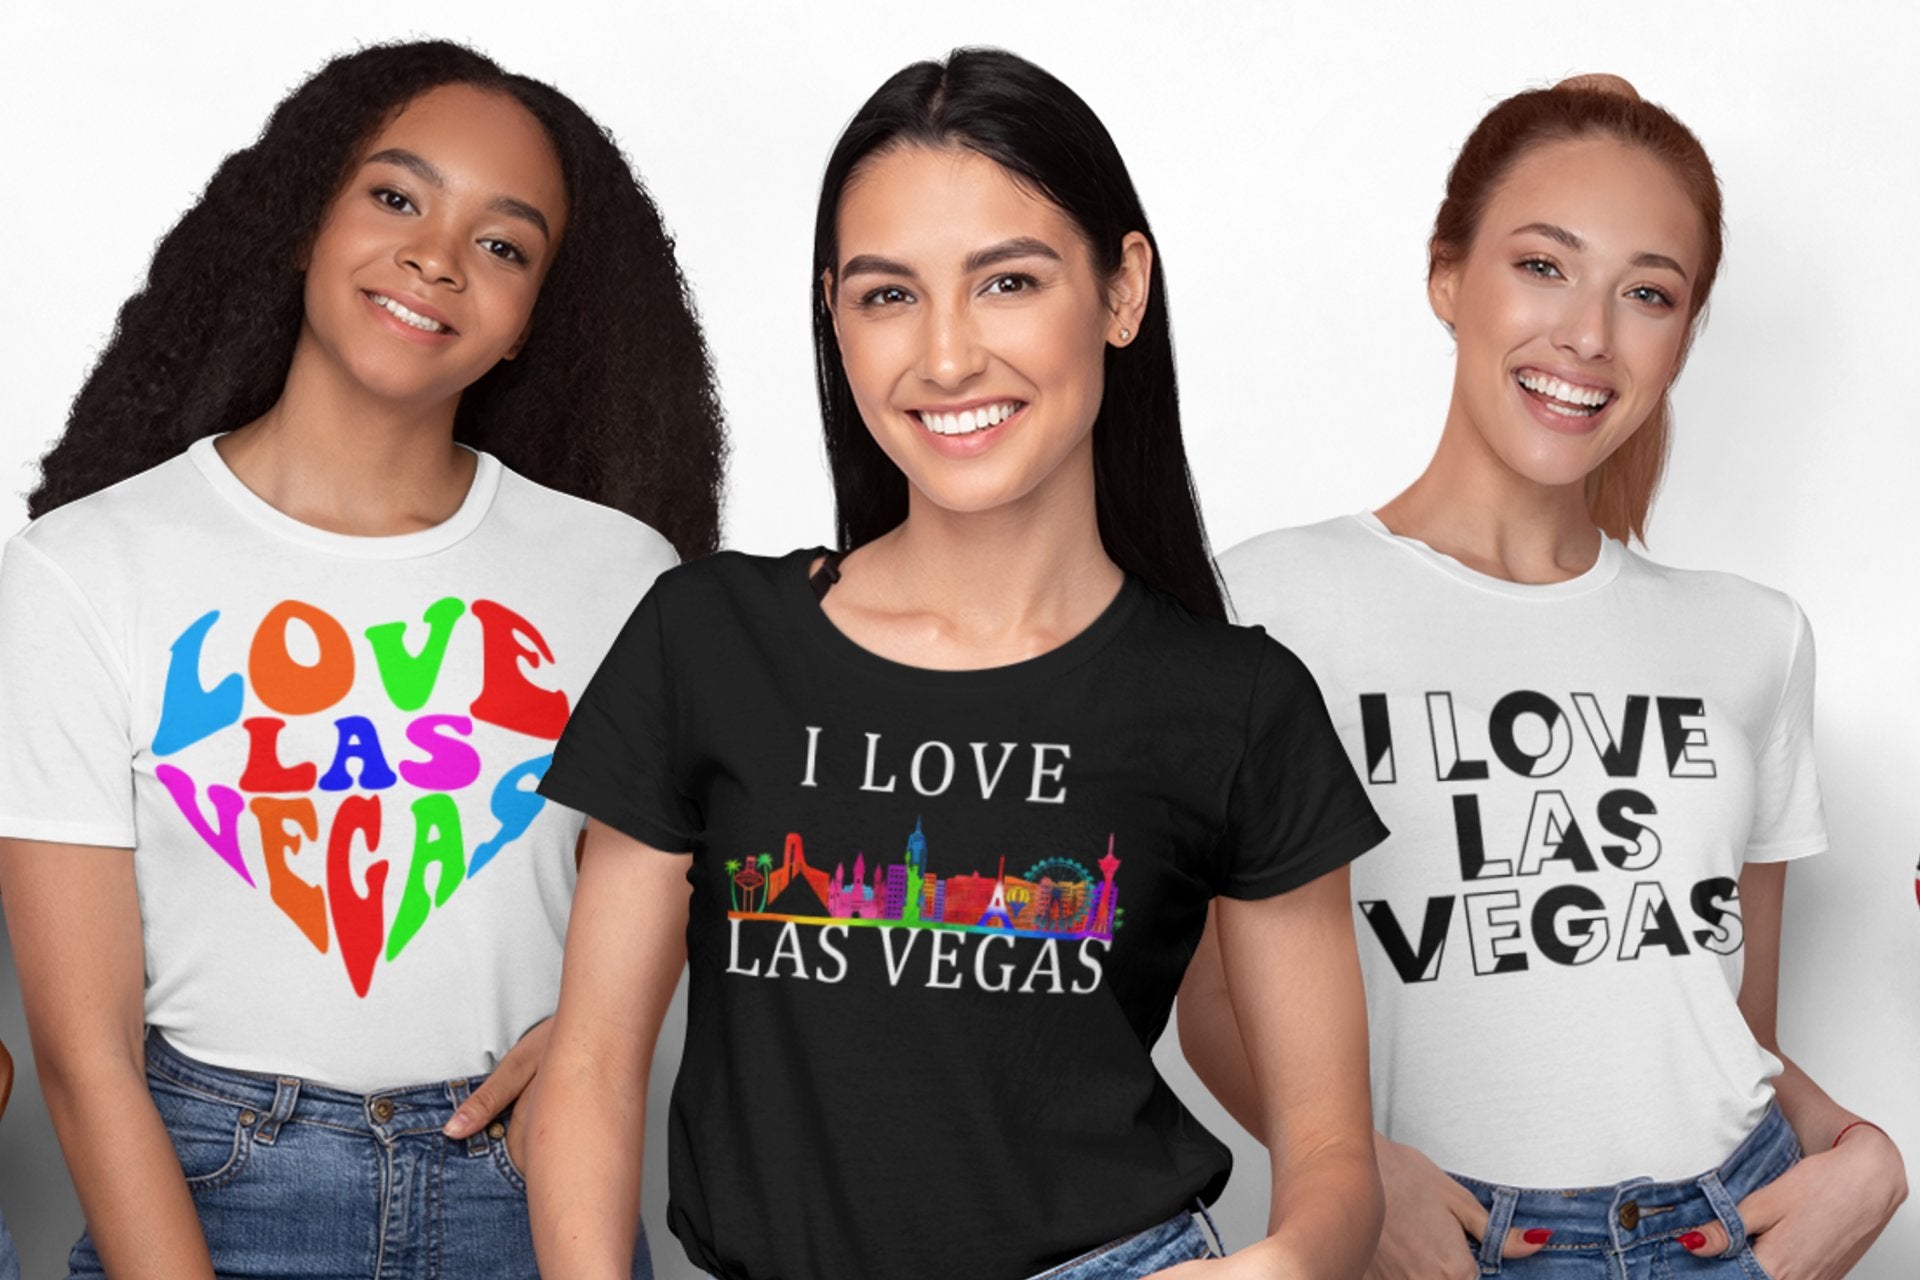 I Love Vegas®: Designs & Collections on Zazzle